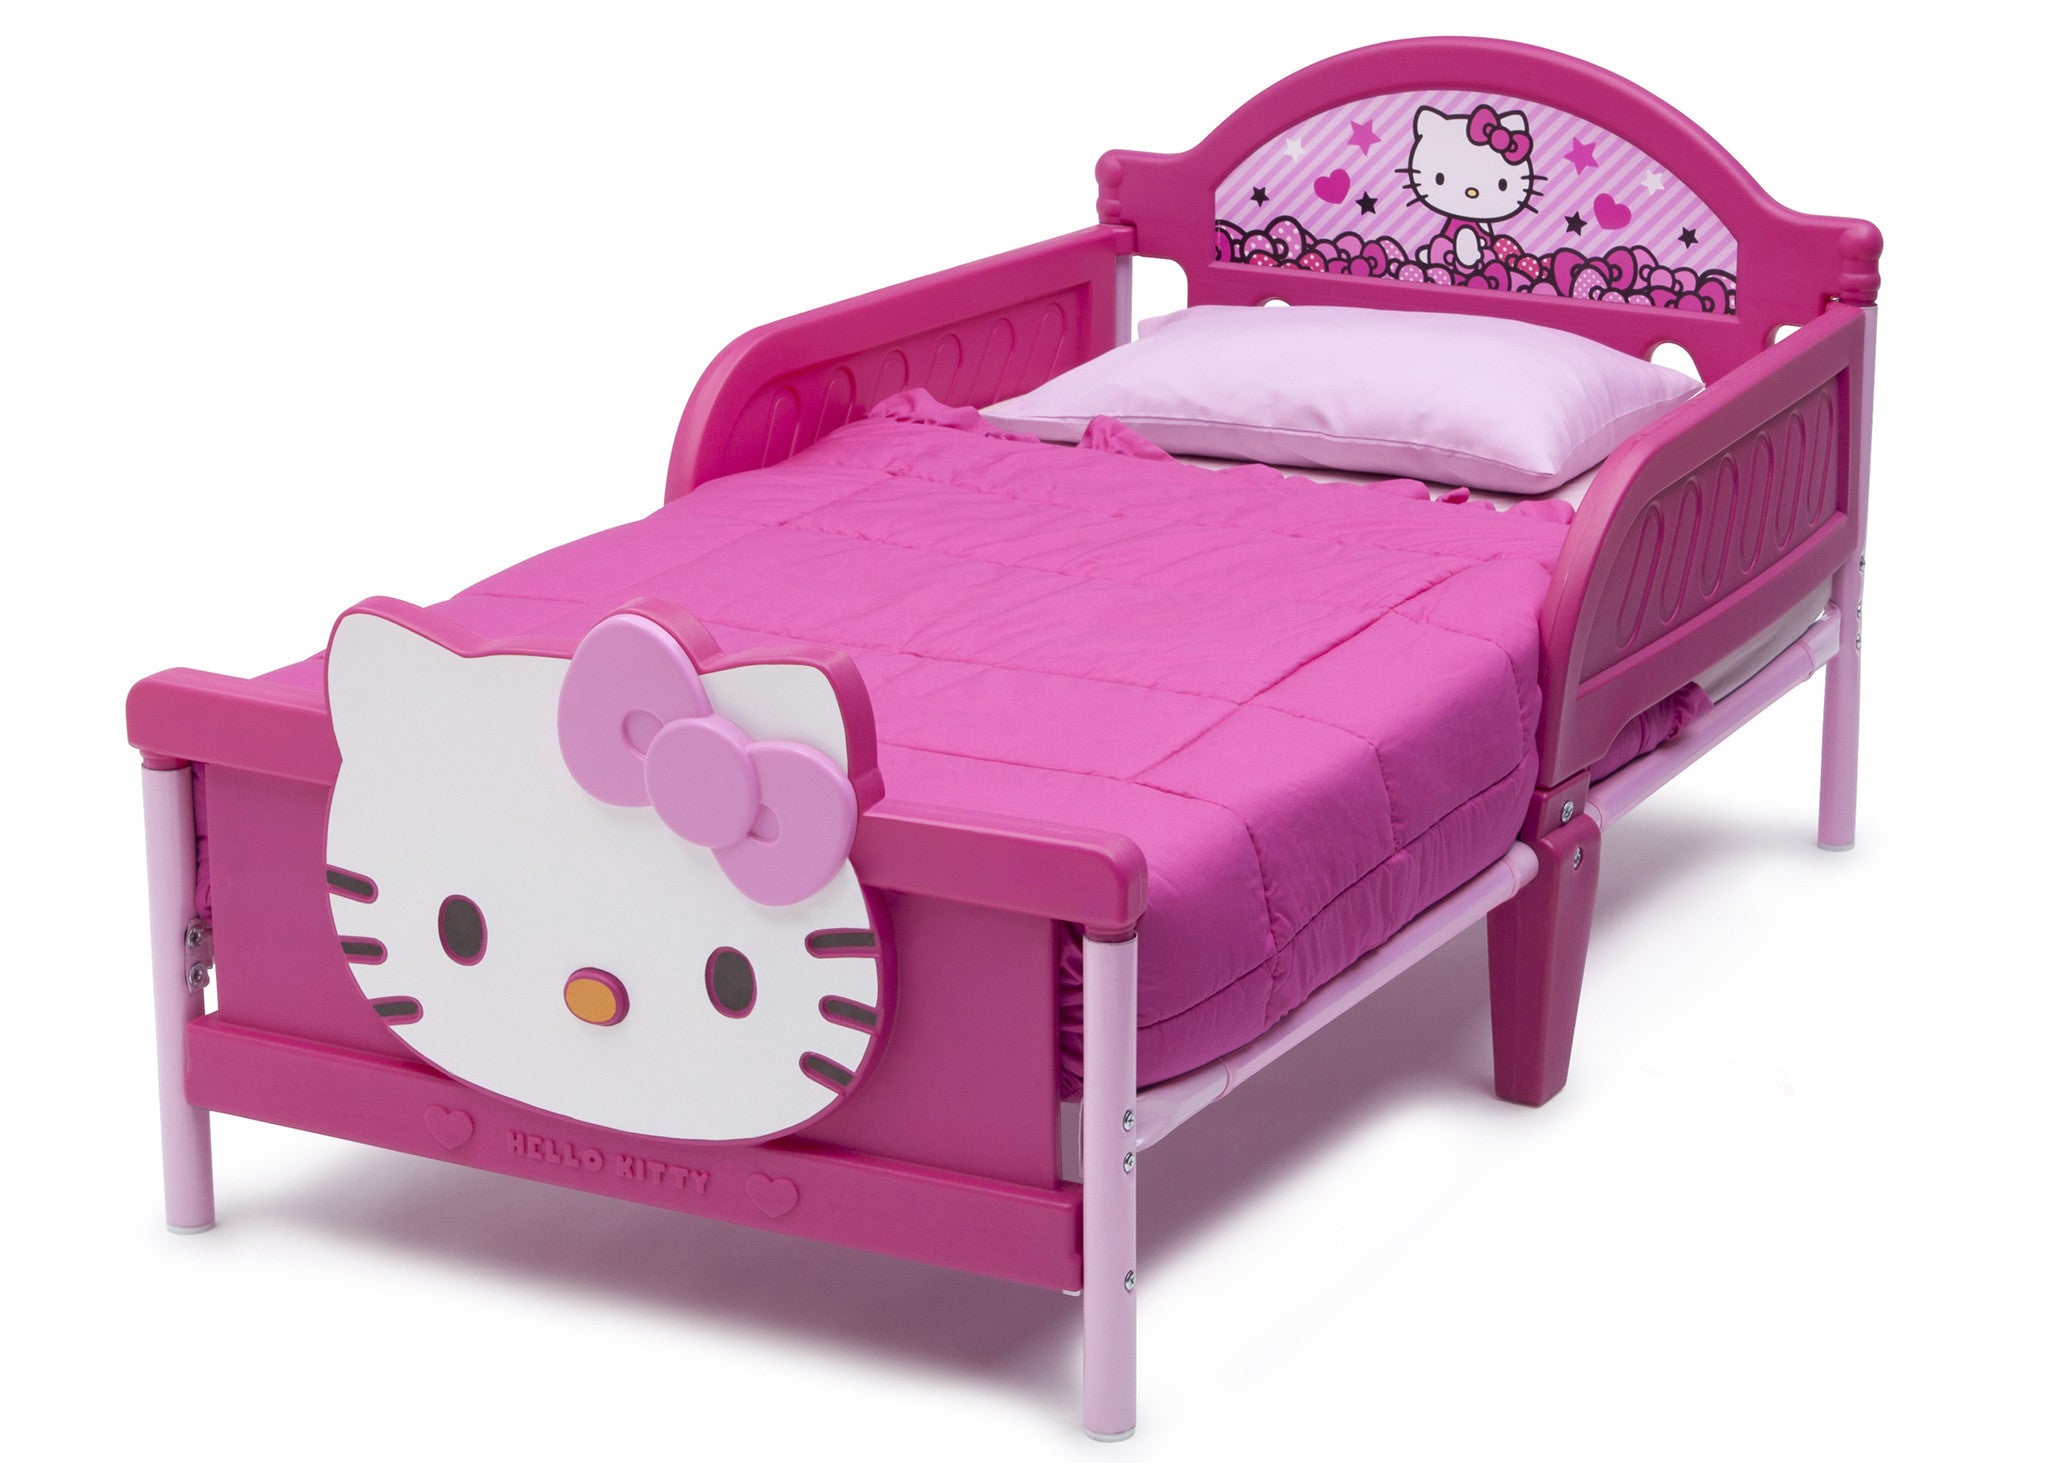  Hello  Kitty  Plastic 3D Toddler  Bed  deltaplayground